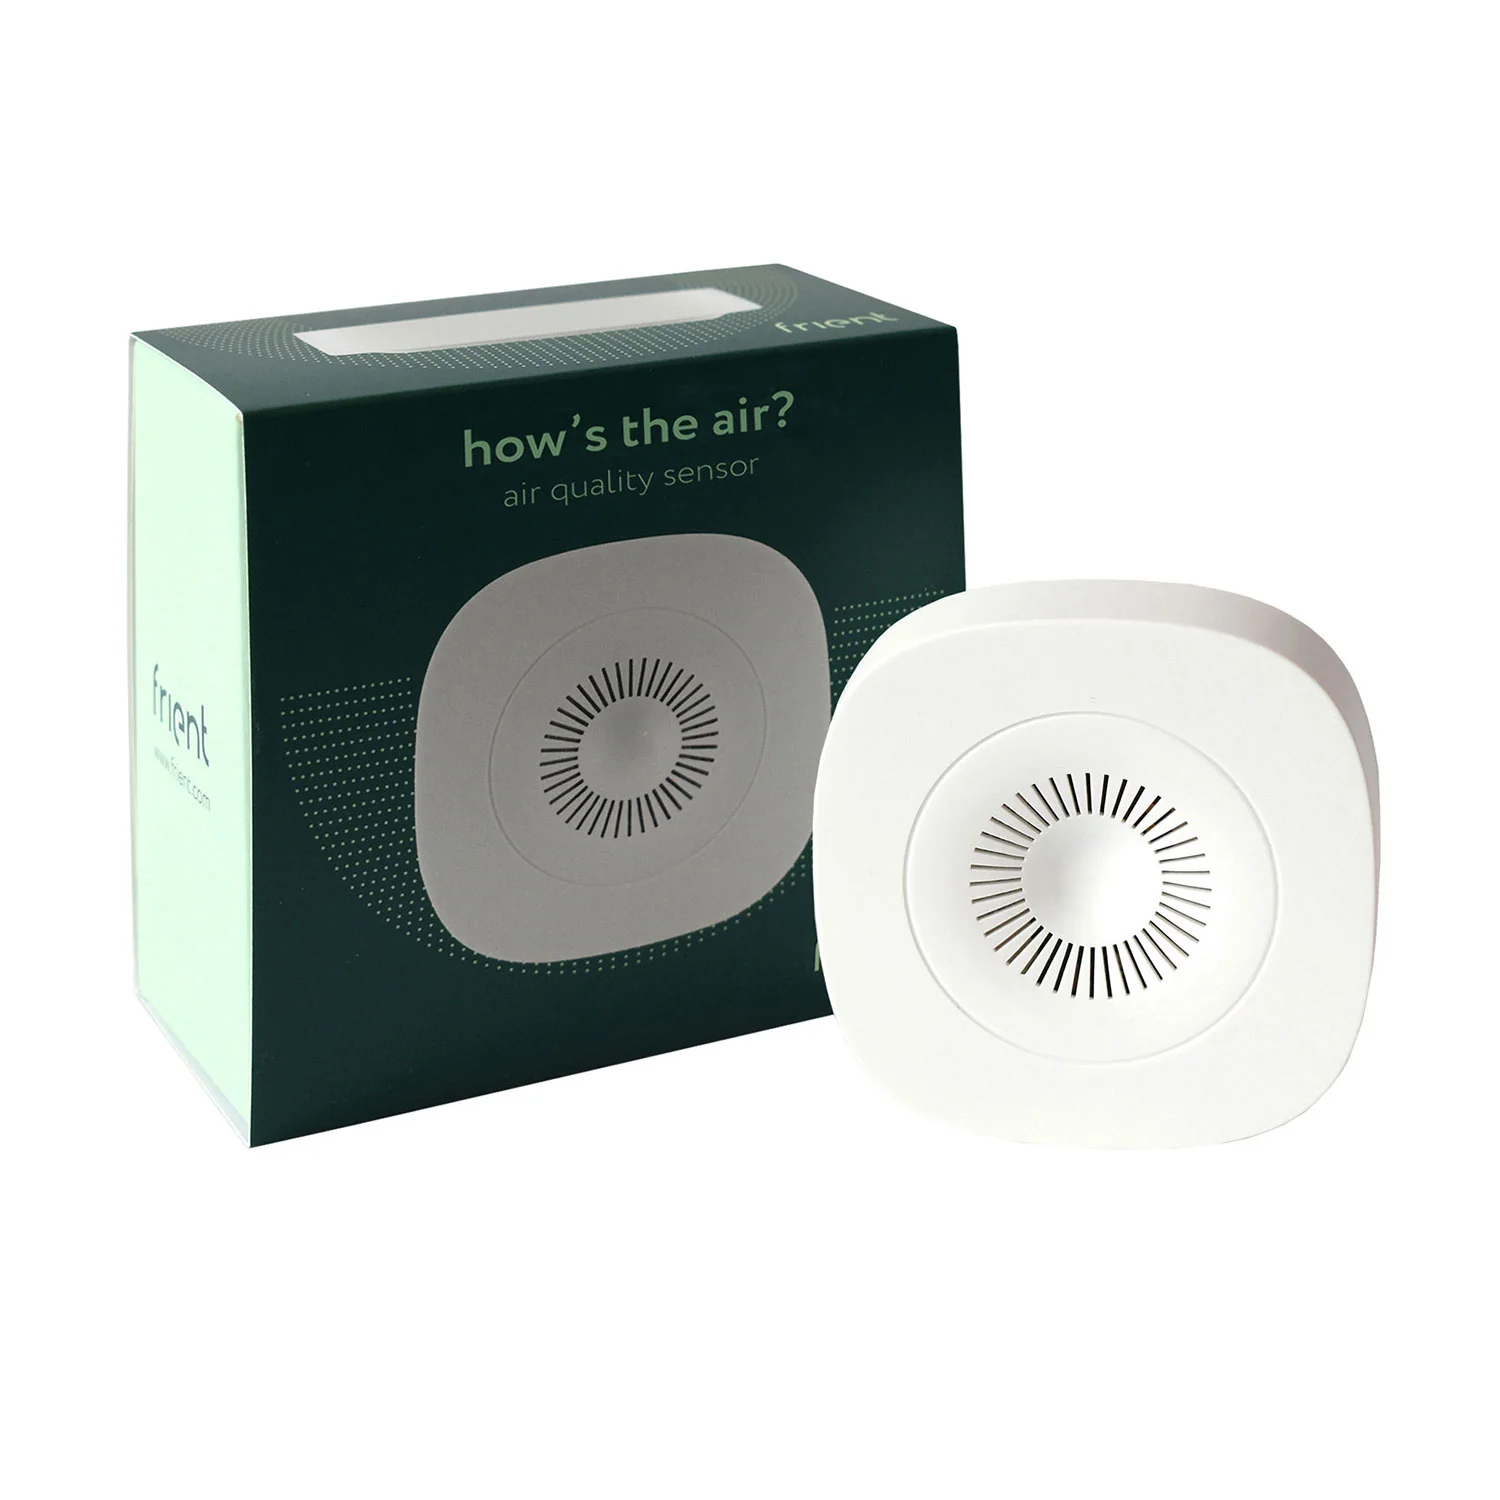 Is the Zigbee Frient Air Quality Sensor compatible with other devices?